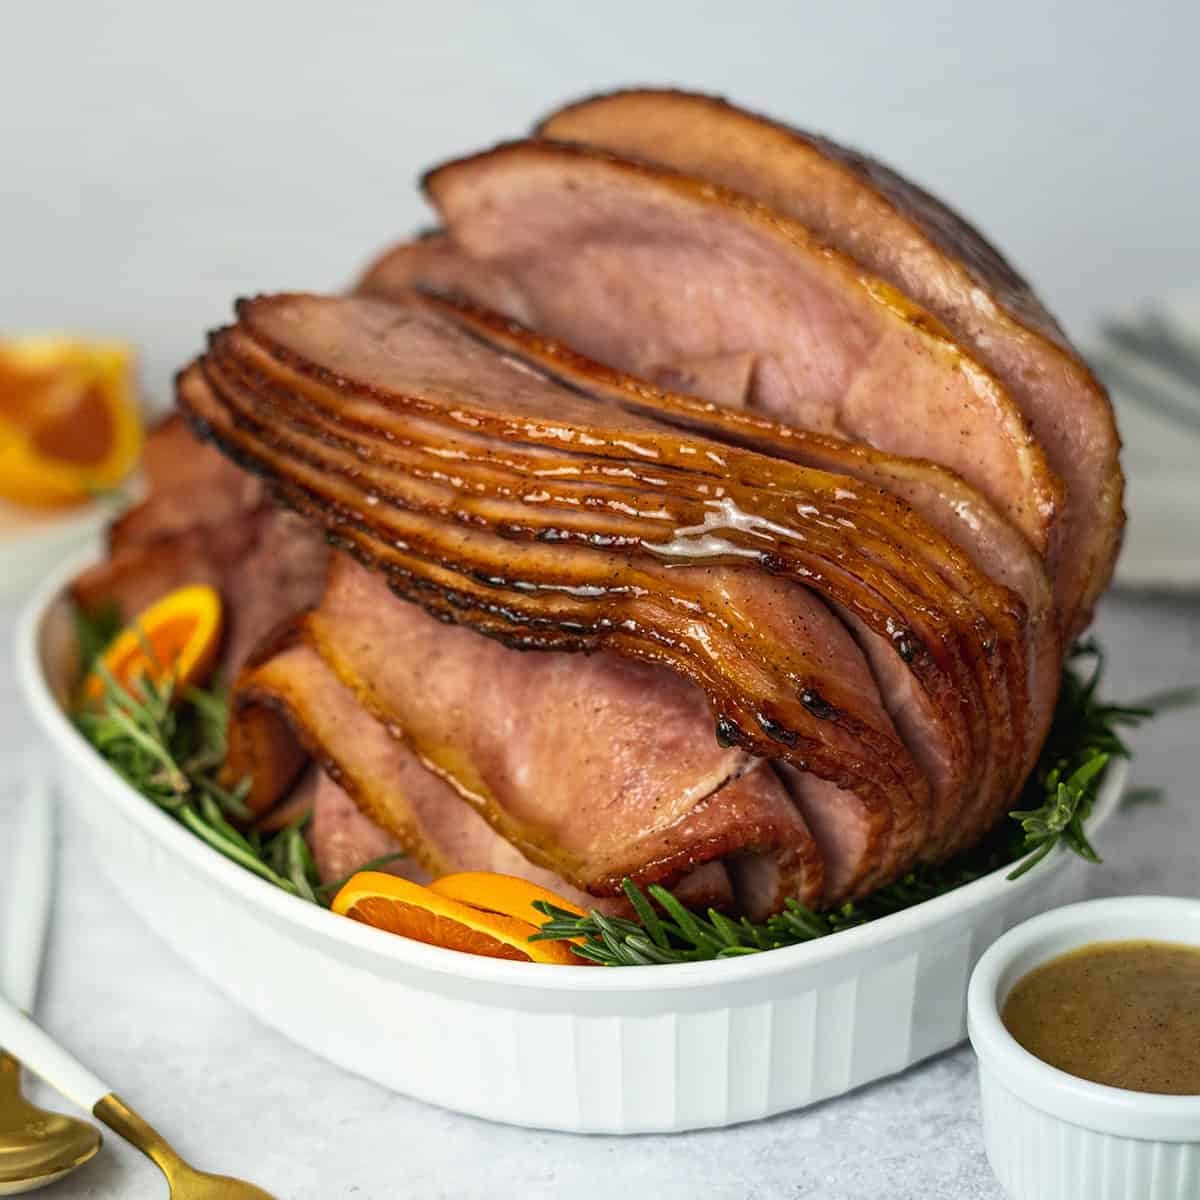 Honey Butter Ham Is an Easy and Delicious Recipe